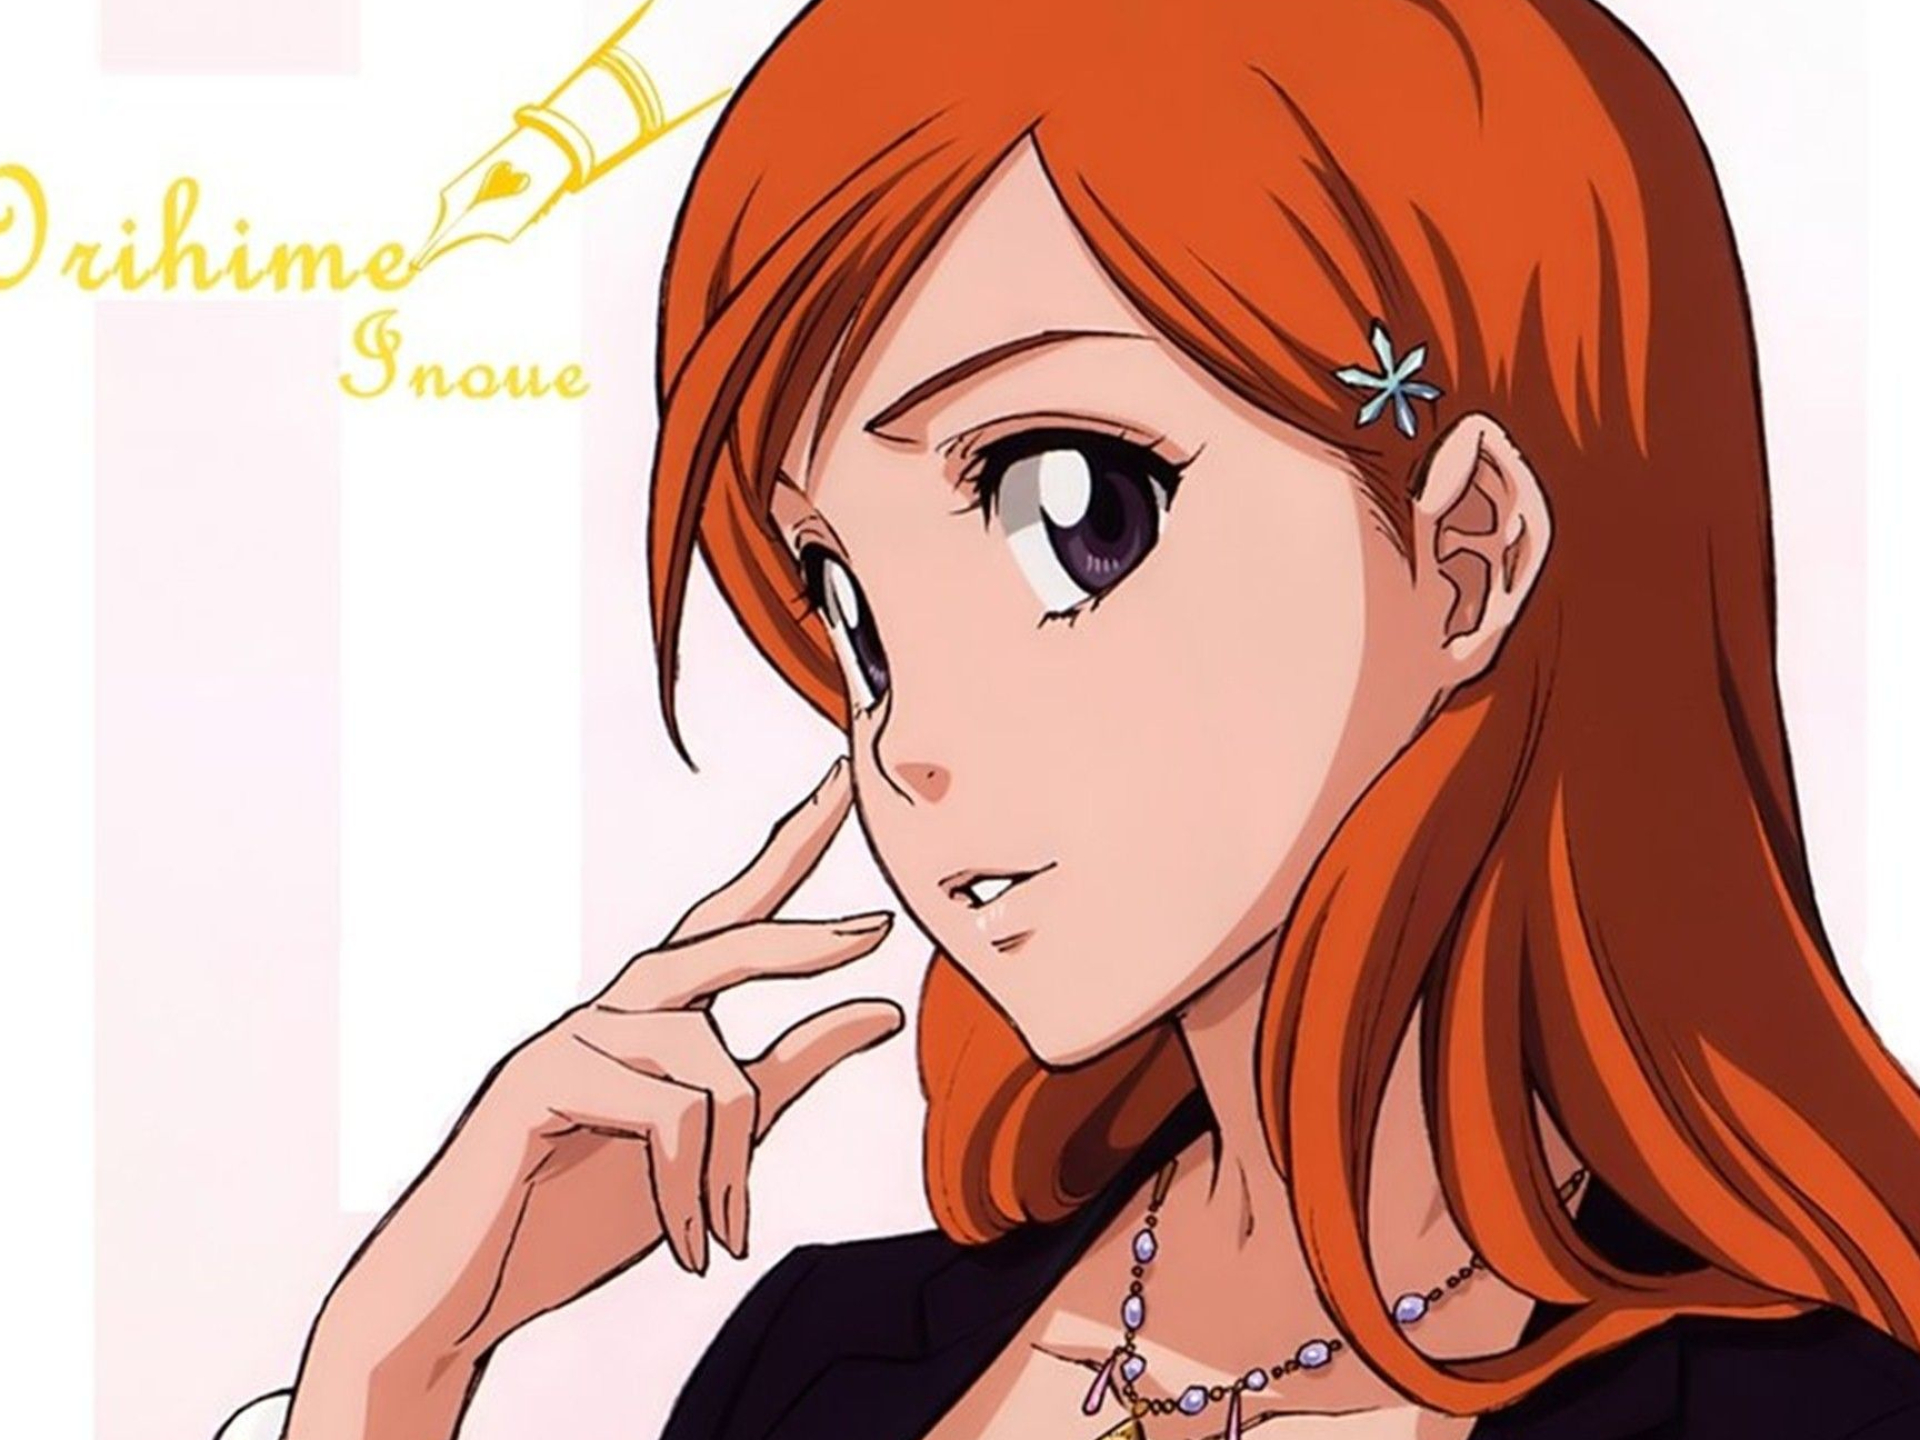 1920x1440 Orihime Inoue 4K Wallpapers Top Free Orihime Inoue 4K Backgrounds